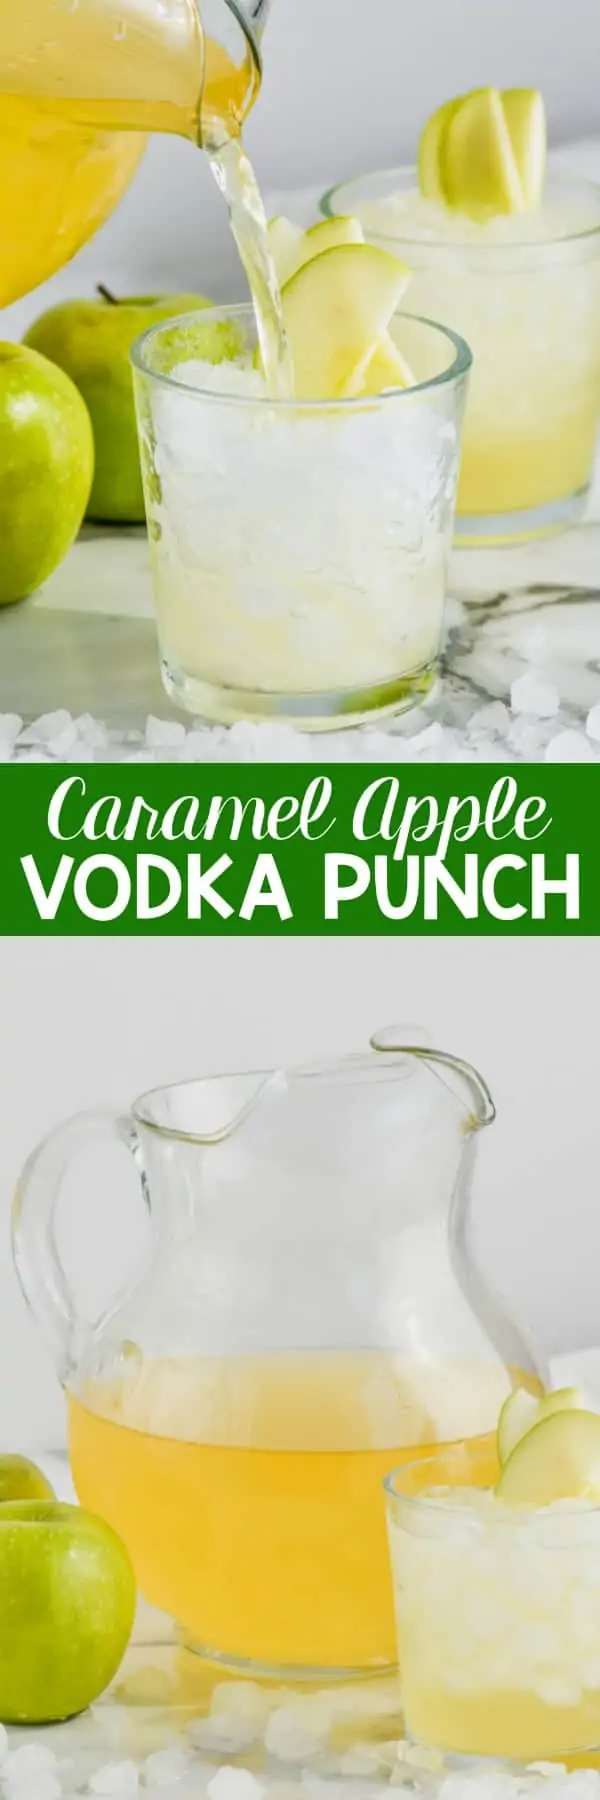 caramel apple vodka punch being poured into a glass of ice garnished with sliced apples